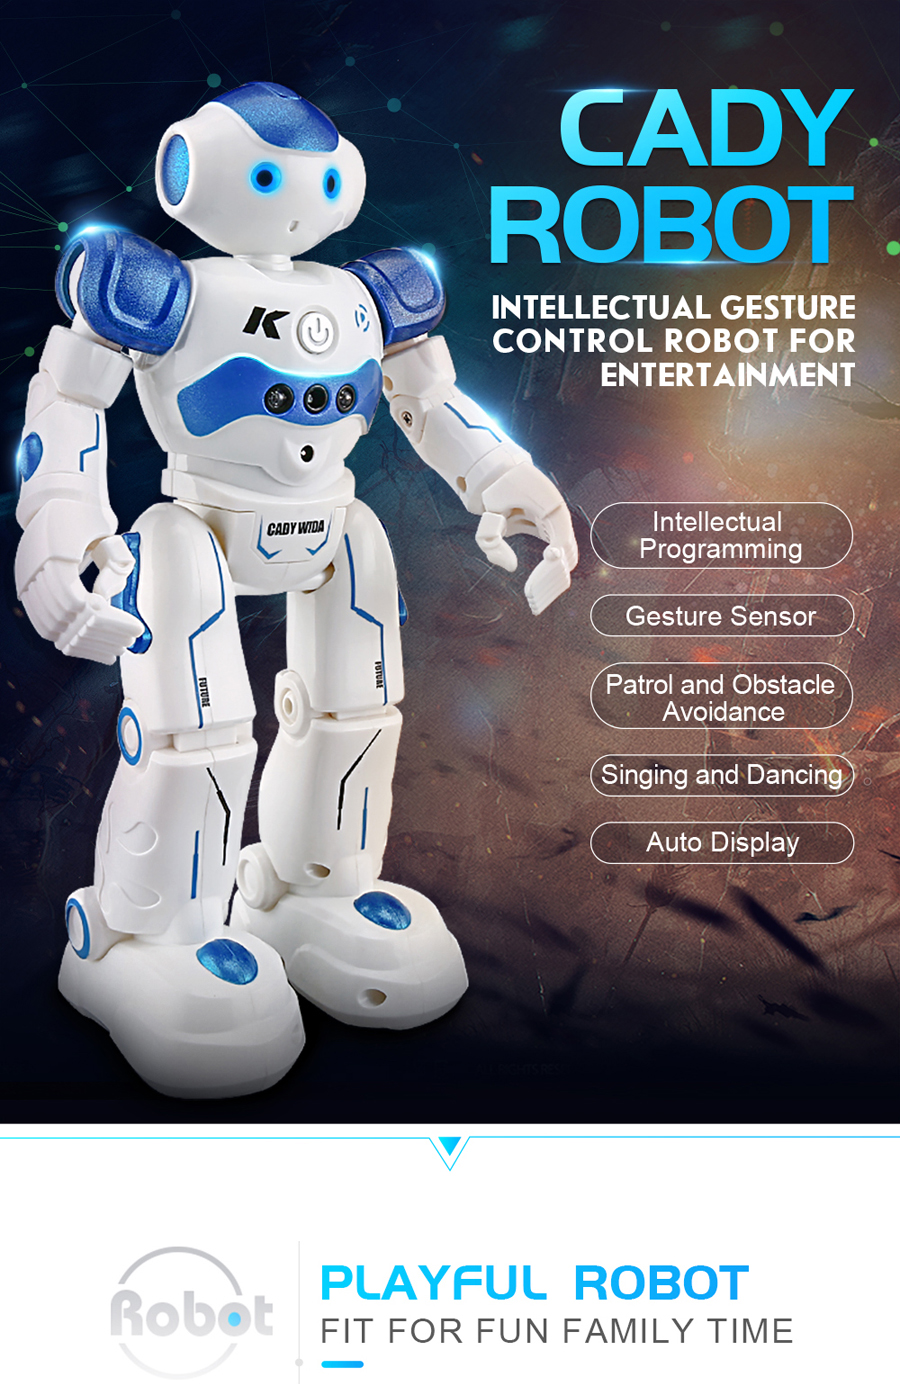 JJRC R2 Cady USB Charging Dancing Gesture Control Robot Toy 11